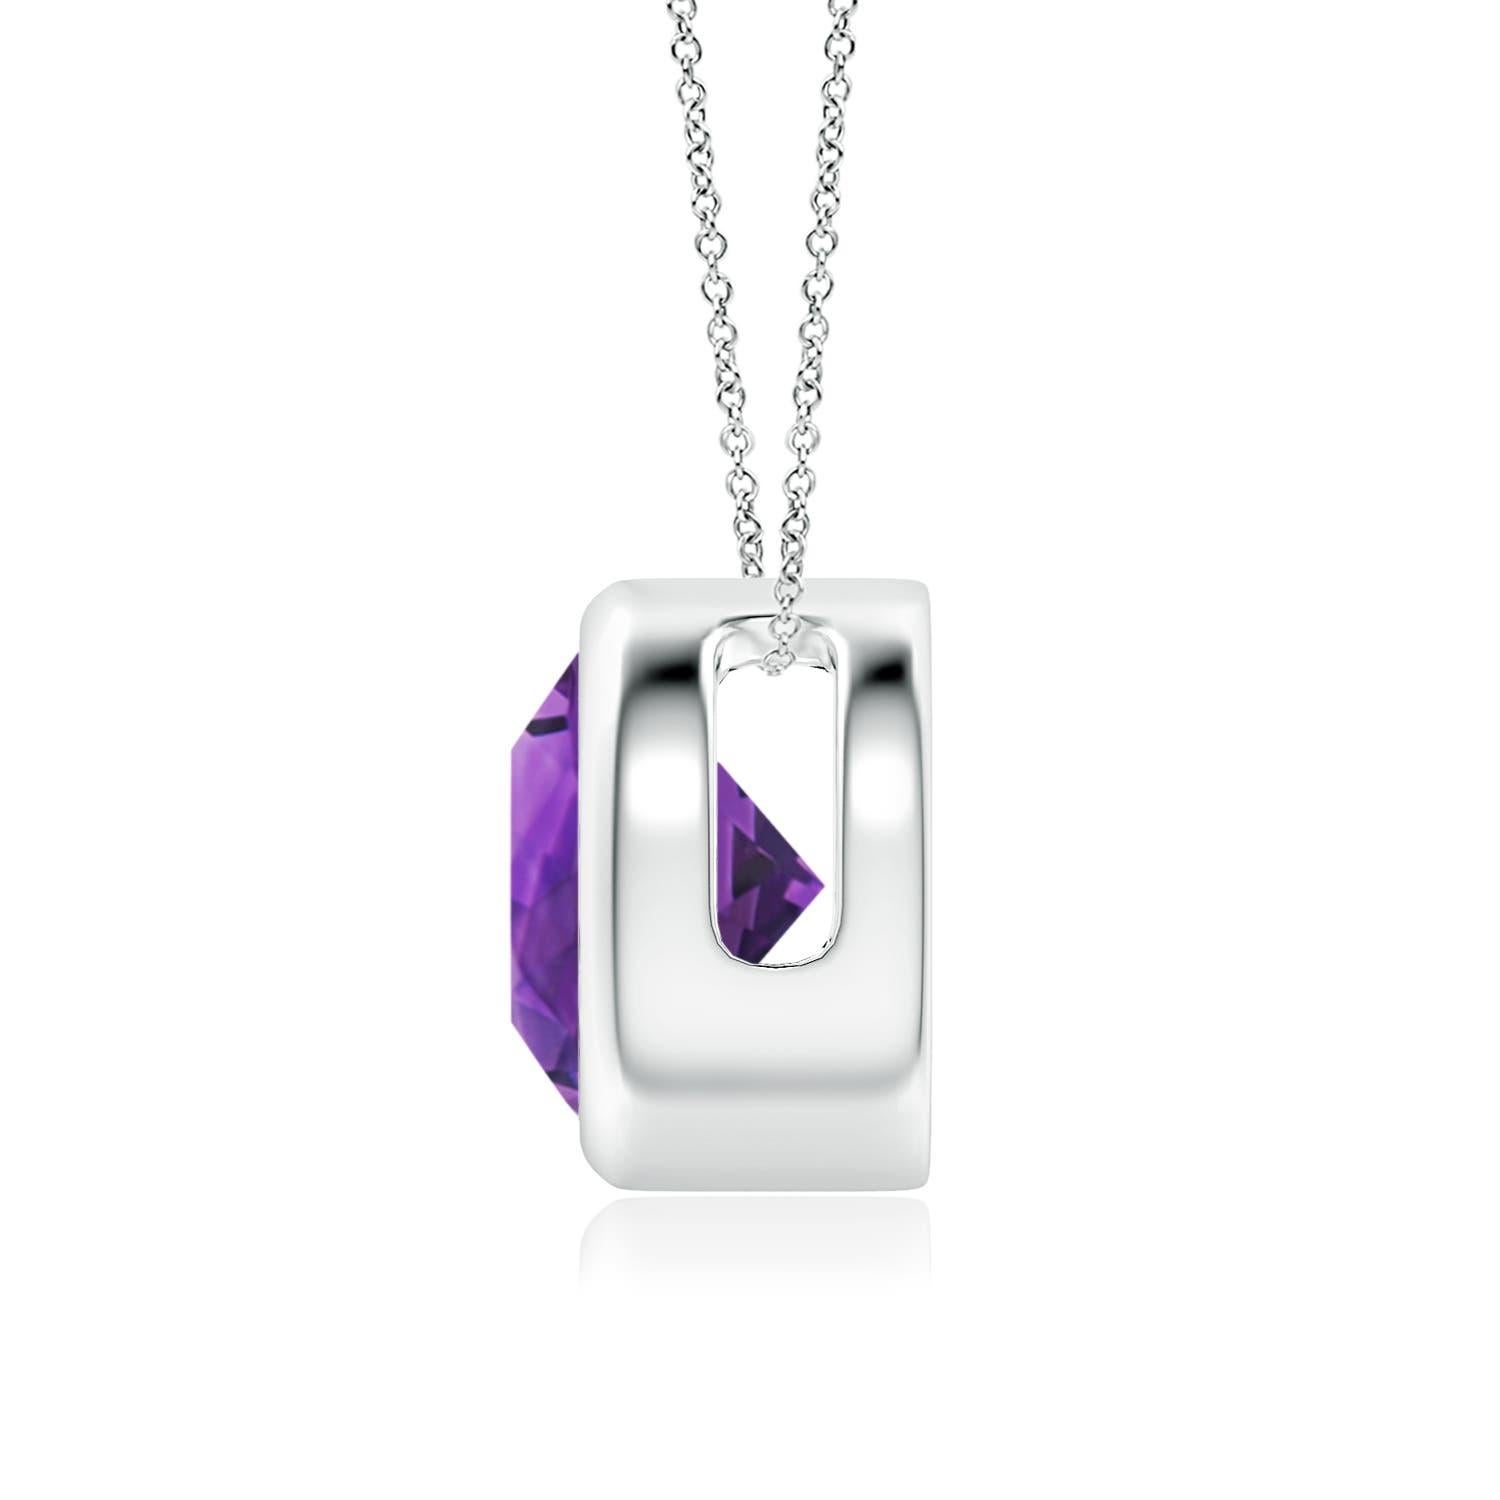 Modern Natural Bezel-Set Round 1.7ct Amethyst Solitaire Pendant in 14K White Gold For Sale